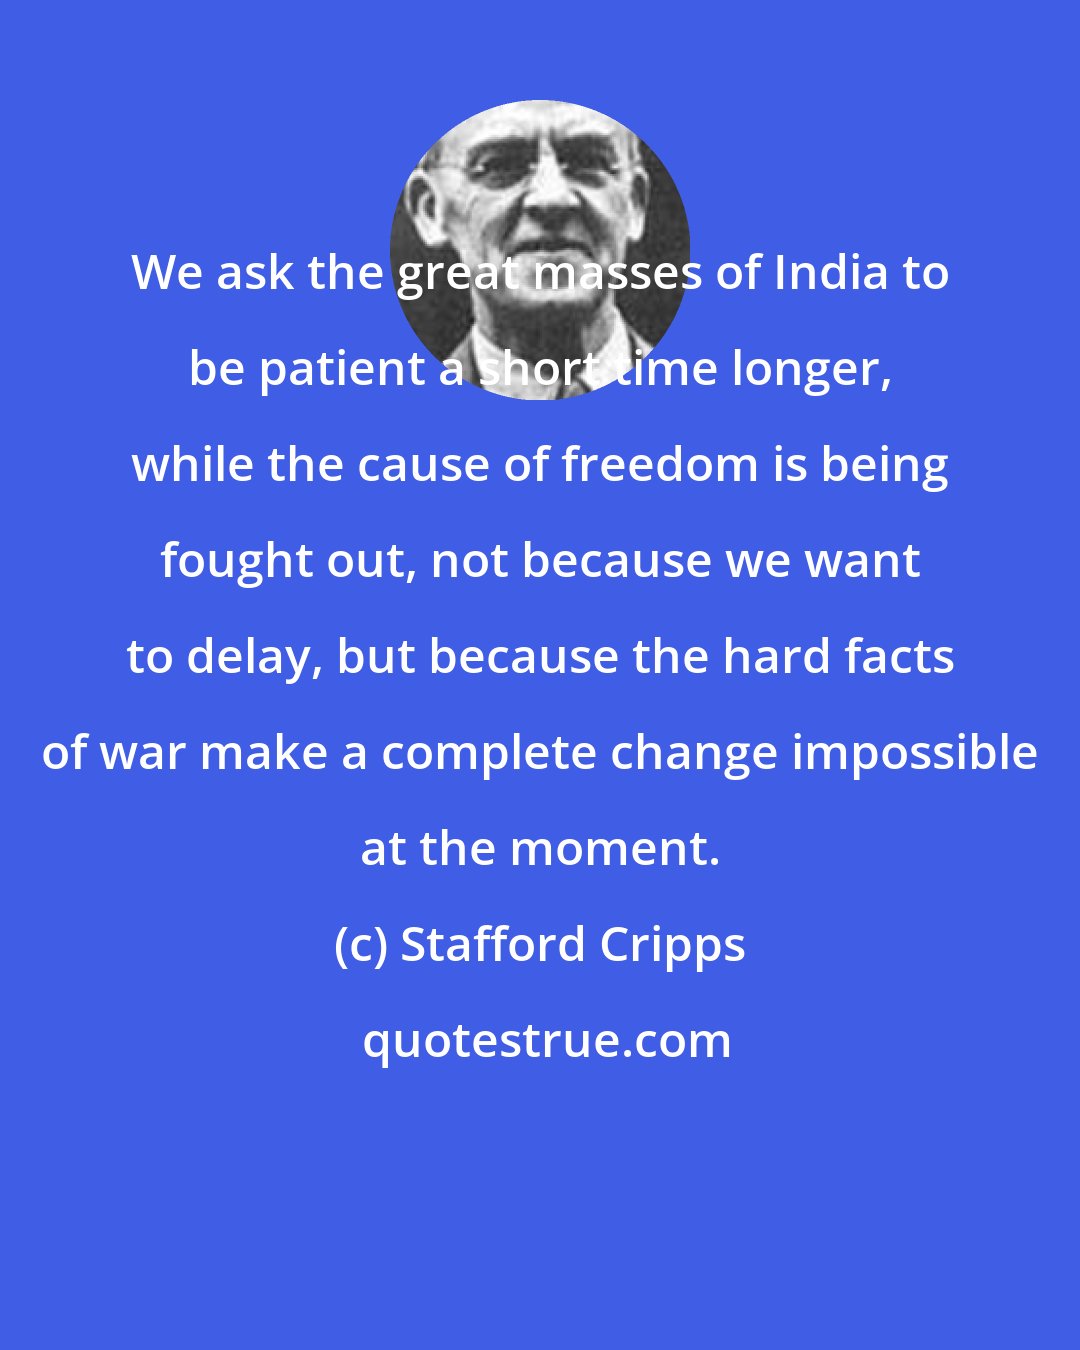 Stafford Cripps: We ask the great masses of India to be patient a short time longer, while the cause of freedom is being fought out, not because we want to delay, but because the hard facts of war make a complete change impossible at the moment.